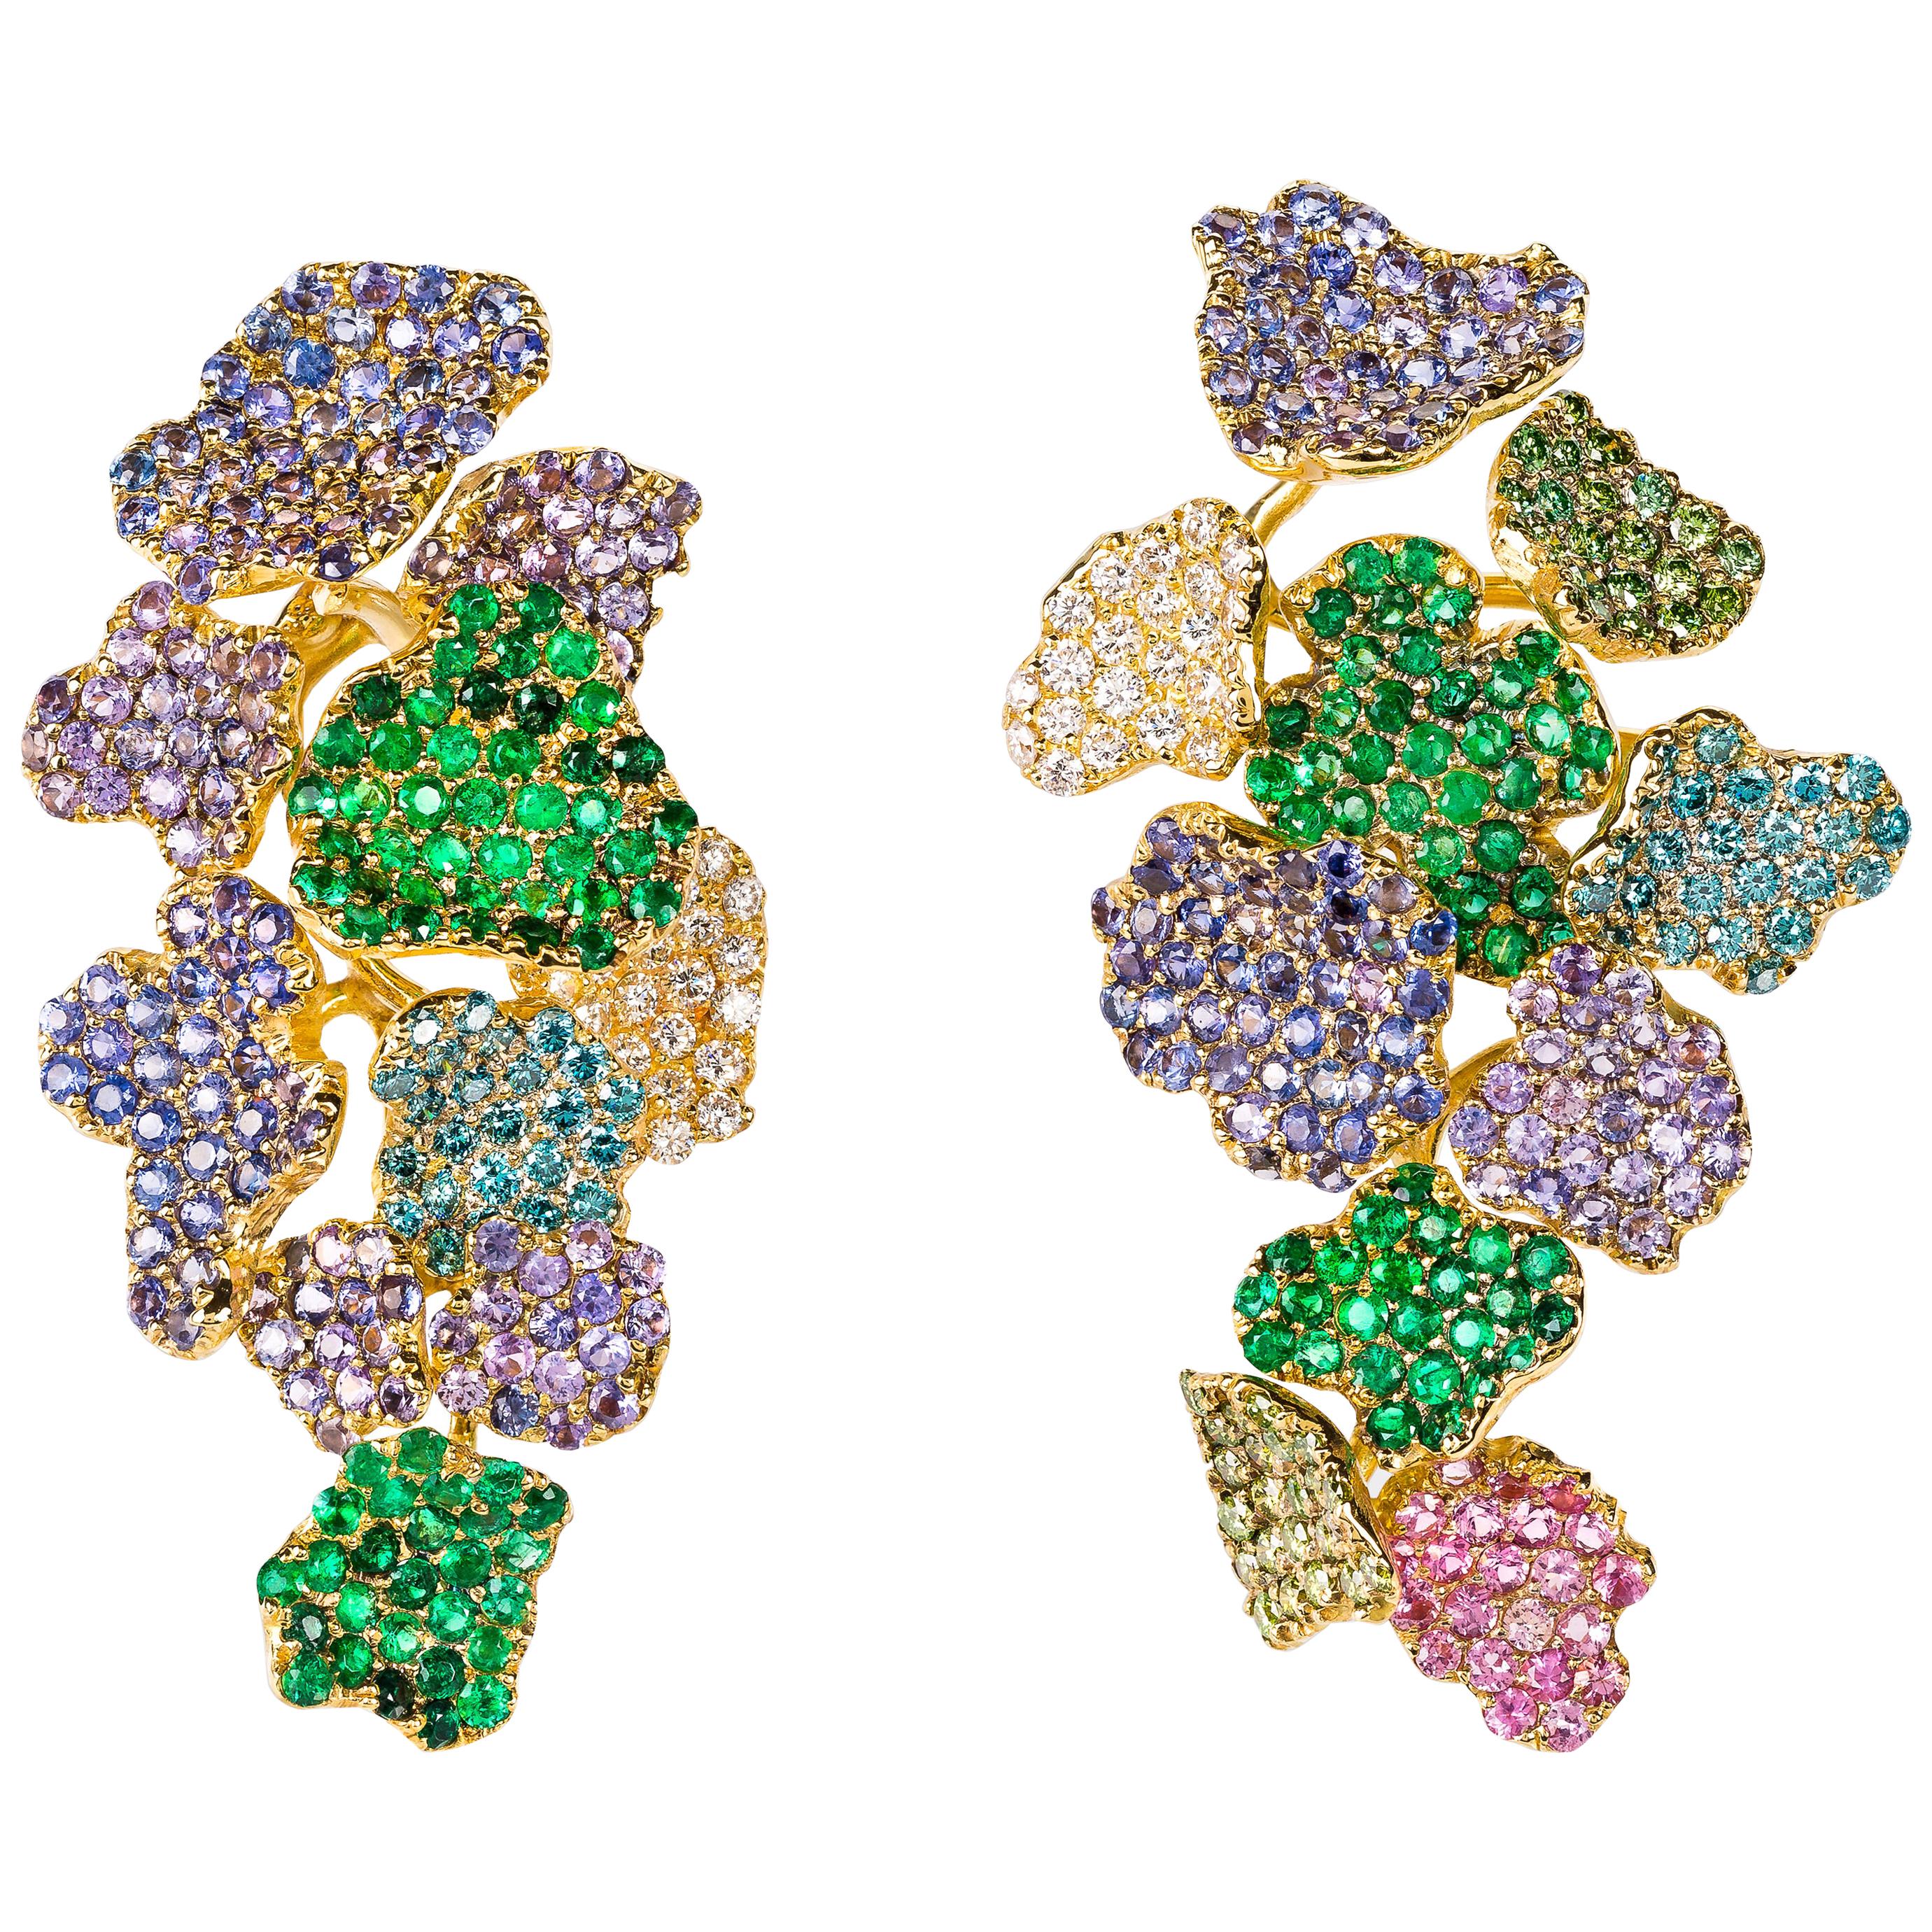 Rosior one-off Diamond, Sapphire and Emerald Drop Earrings set in Yellow Gold